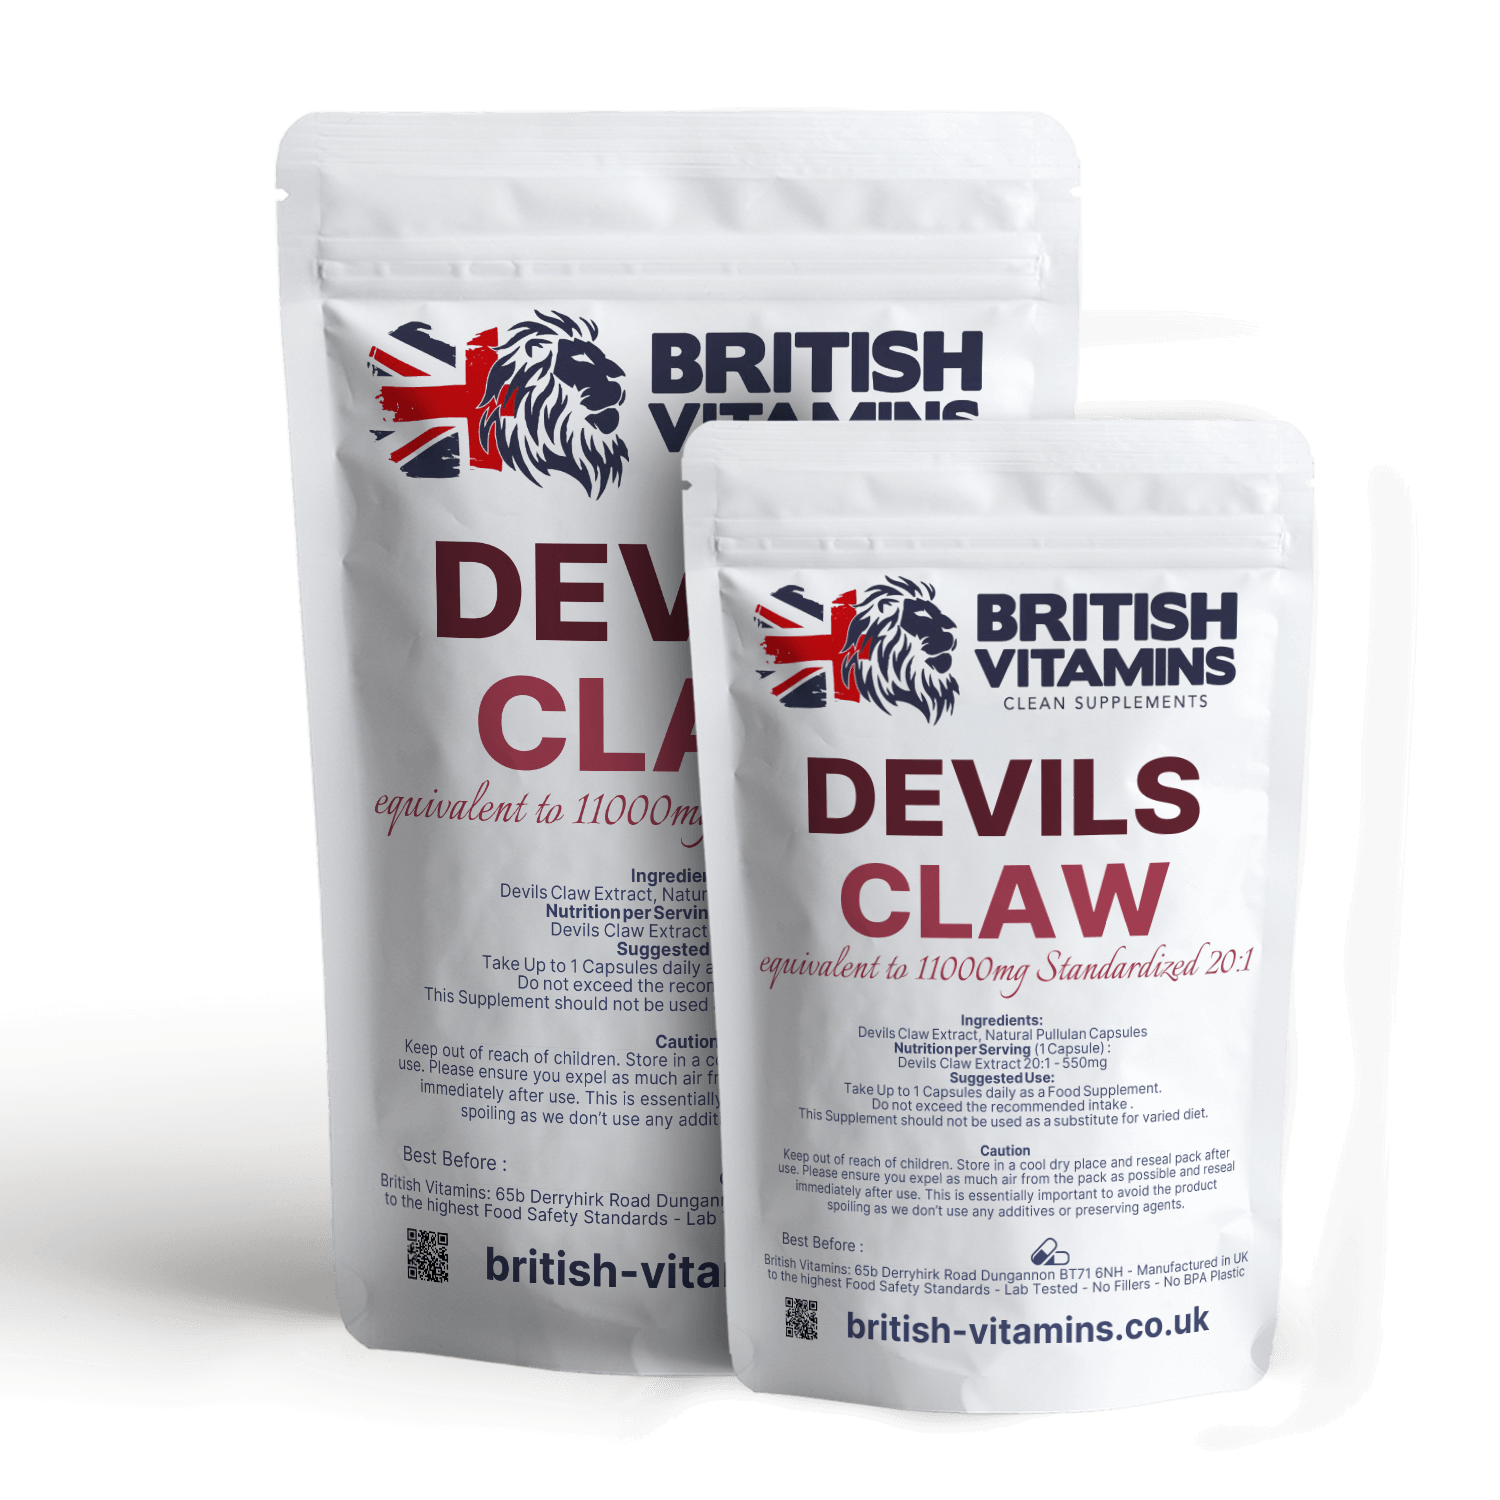 Devils Claw Extract 20:1 11000mg Extract Health & Beauty:Vitamins & Lifestyle Supplements:Vitamins & Minerals British Vitamins 5 Capsules ( Sample )  